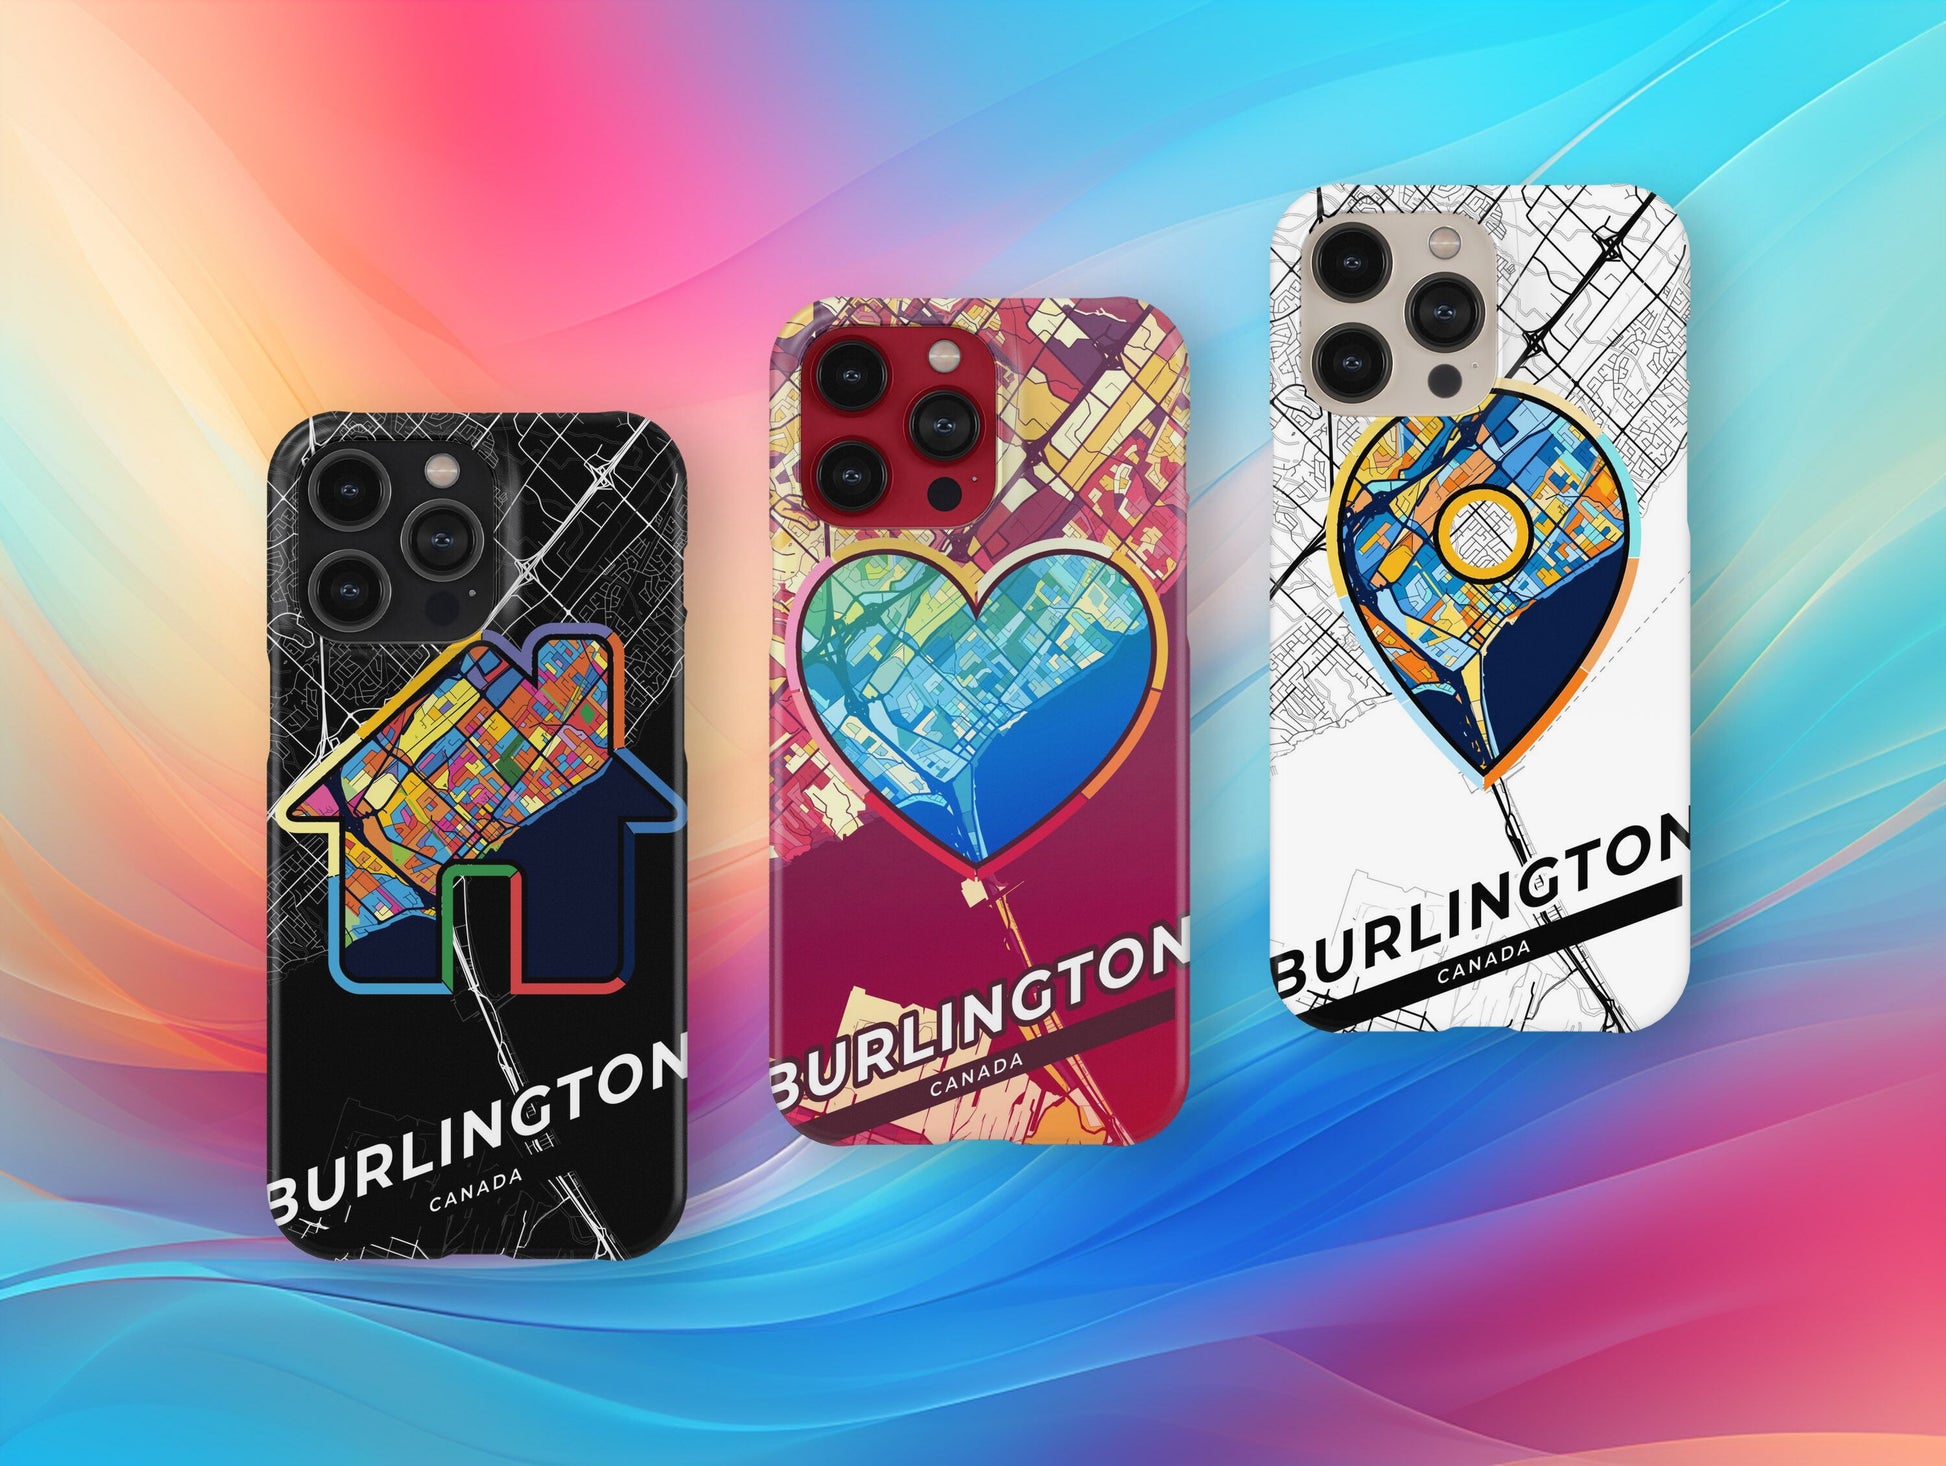 Burlington Canada slim phone case with colorful icon. Birthday, wedding or housewarming gift. Couple match cases.